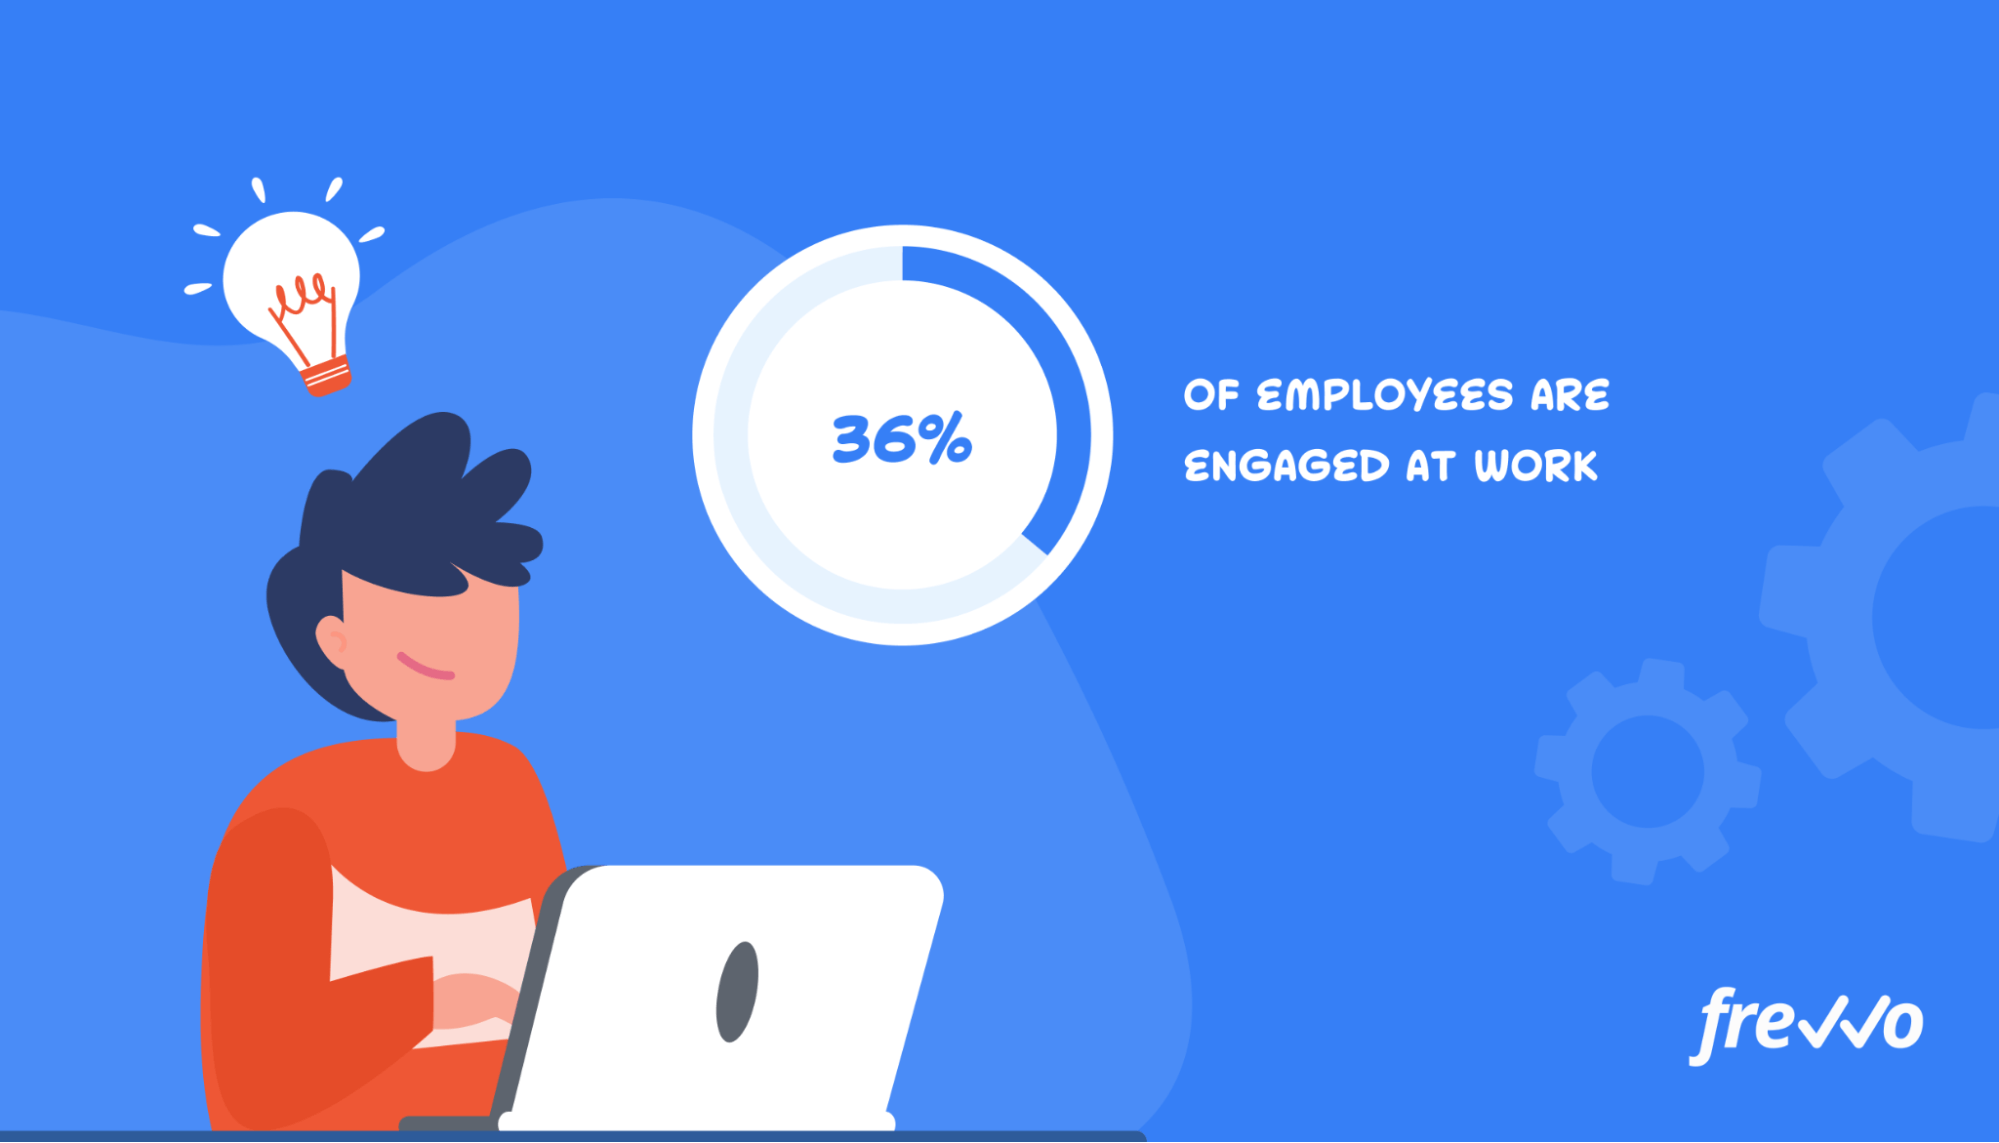 36% of employees are engaged at work